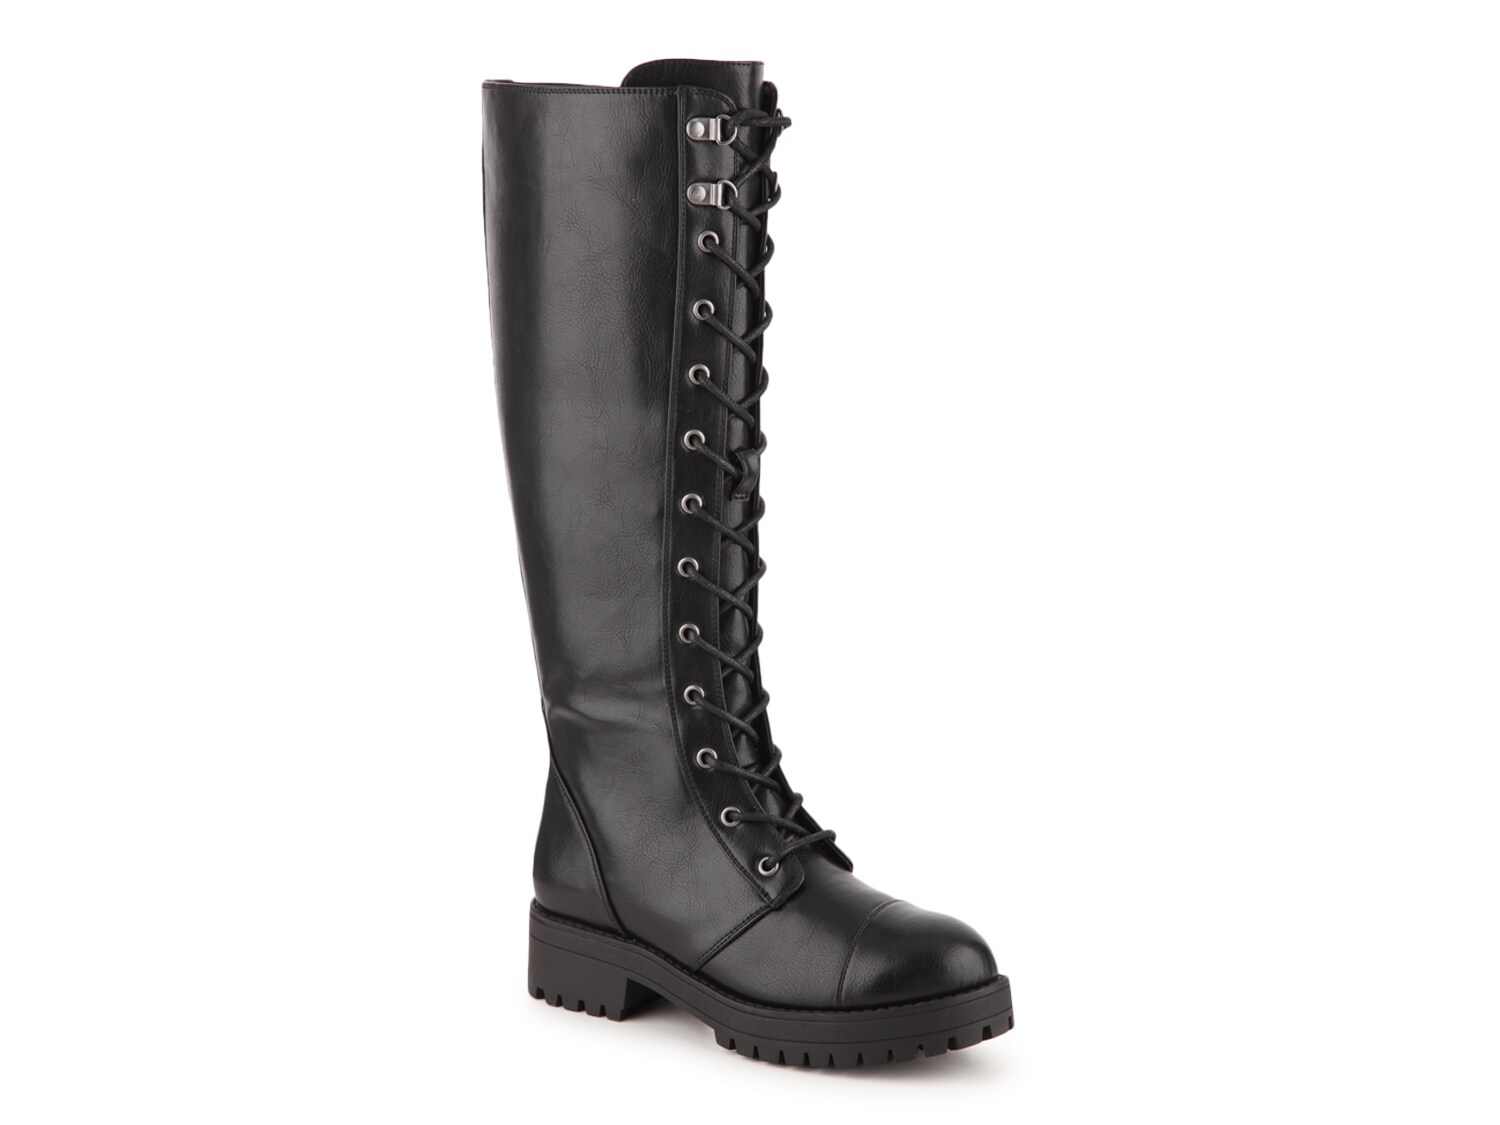 Dirty Laundry Verve Boot Women's Shoes 